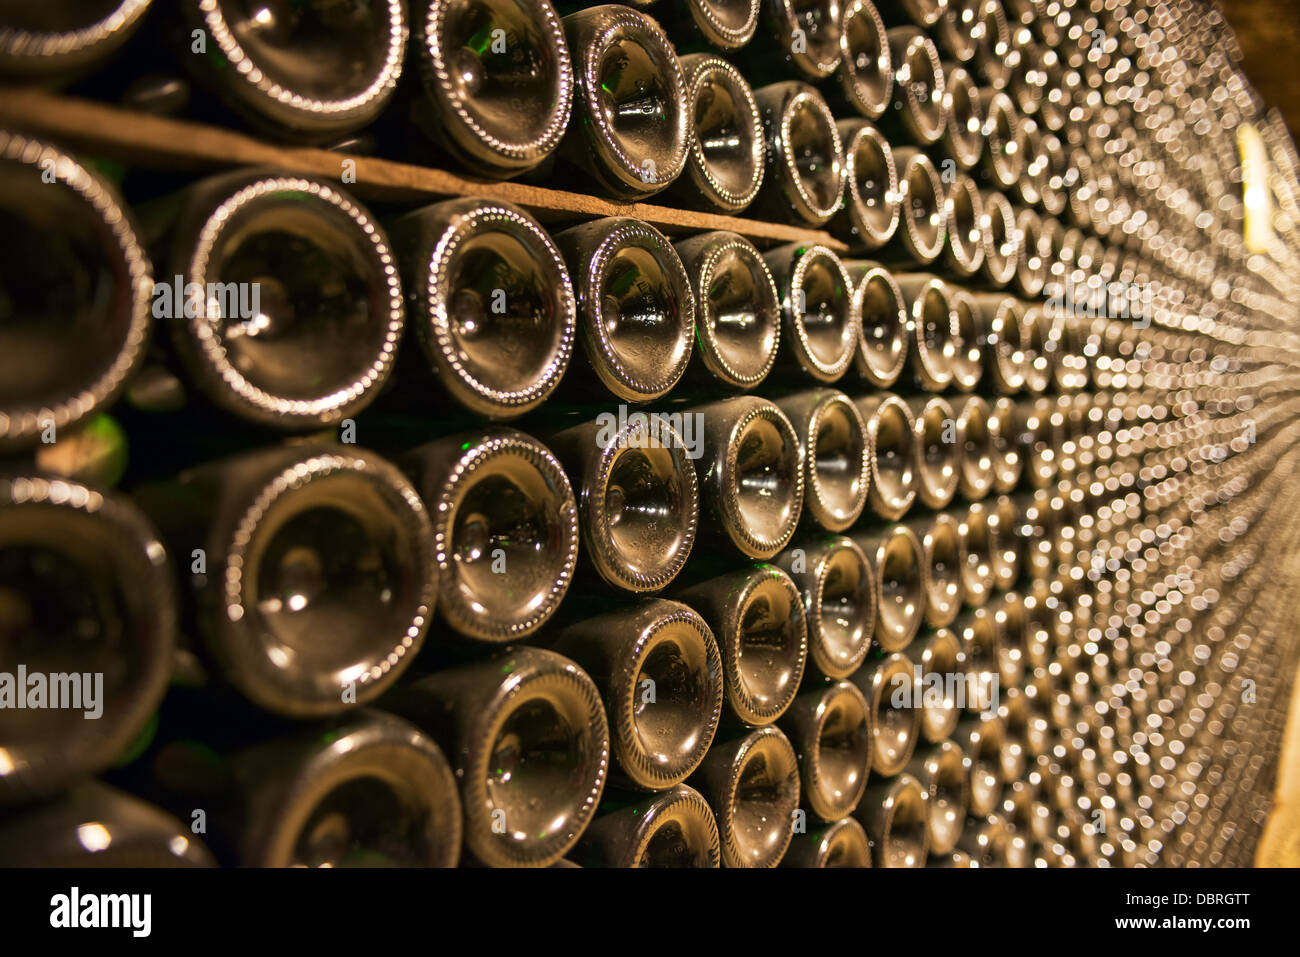 Wine bottles, racked, aging in the 'caves touristique' cellars of Vouvray in the Loire valley, Indre et Loire, France Stock Photo